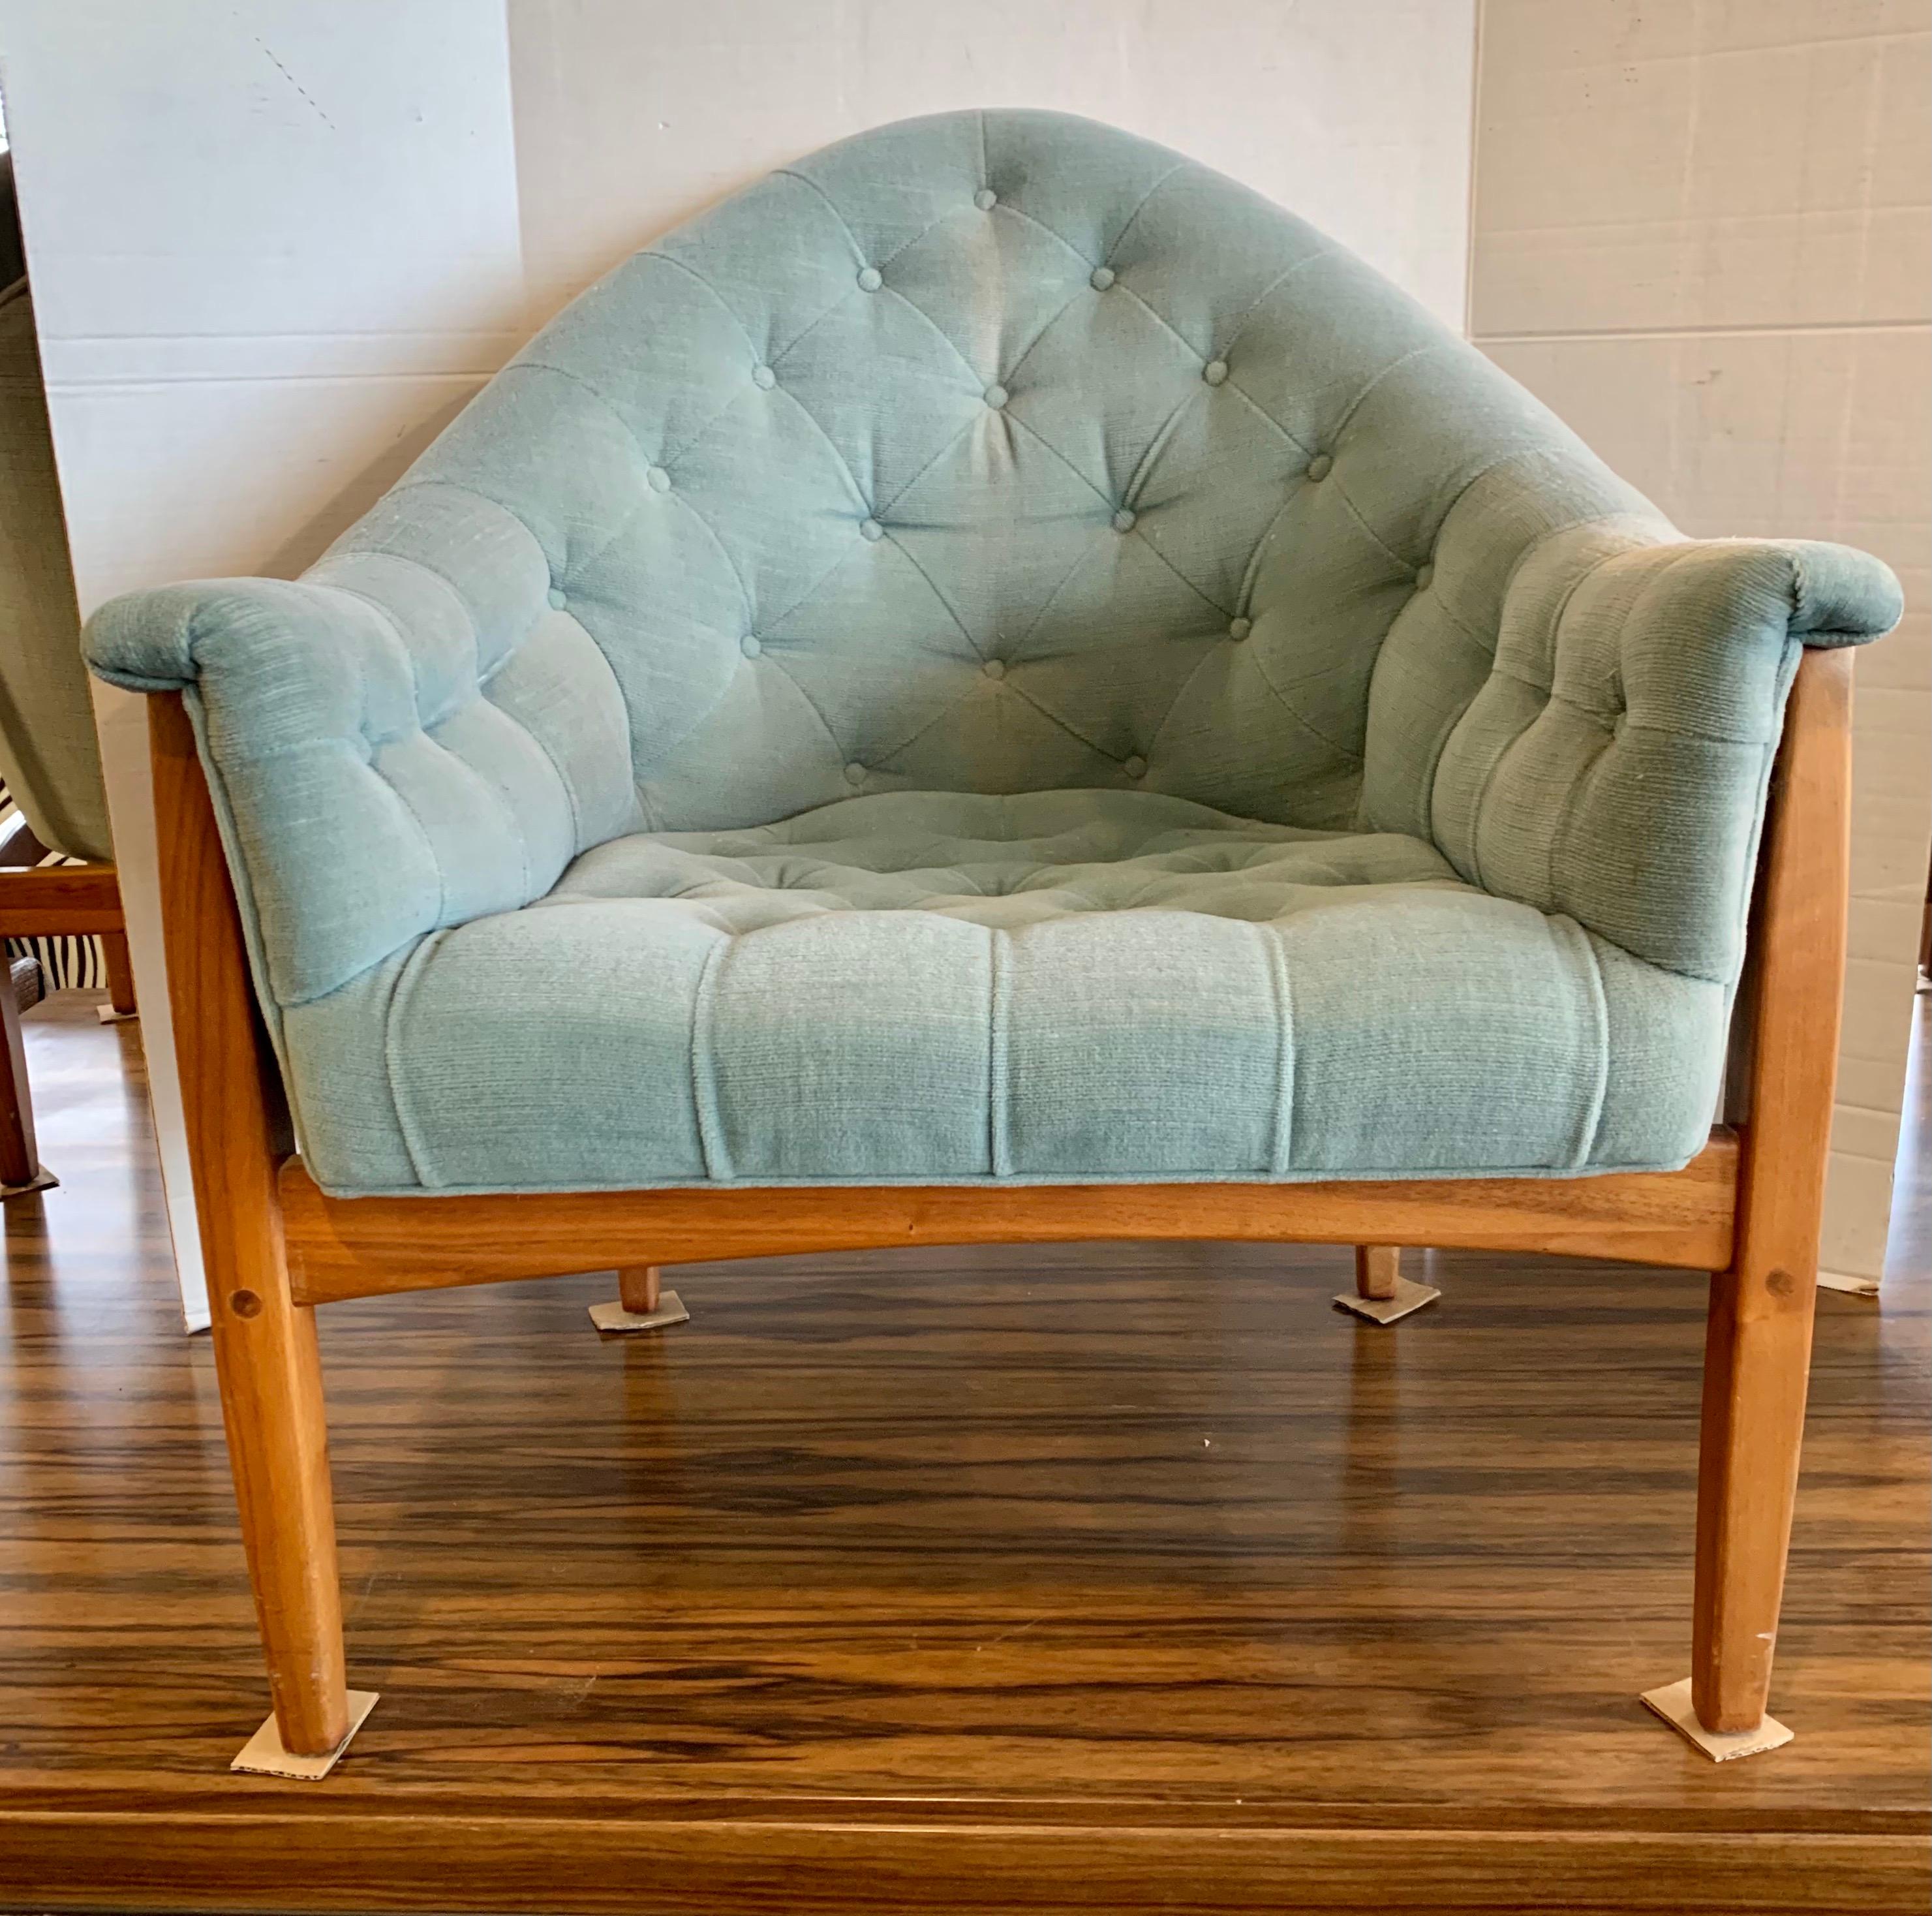 Ultra coveted tufted velvet lounge chair with exterior mounted mahogany frame by Milo Baughman for Thayer Coggin, circa 1965. All hallmarks are present and attached on photos. The frame is sturdy and magnificent.
We have less than five of these